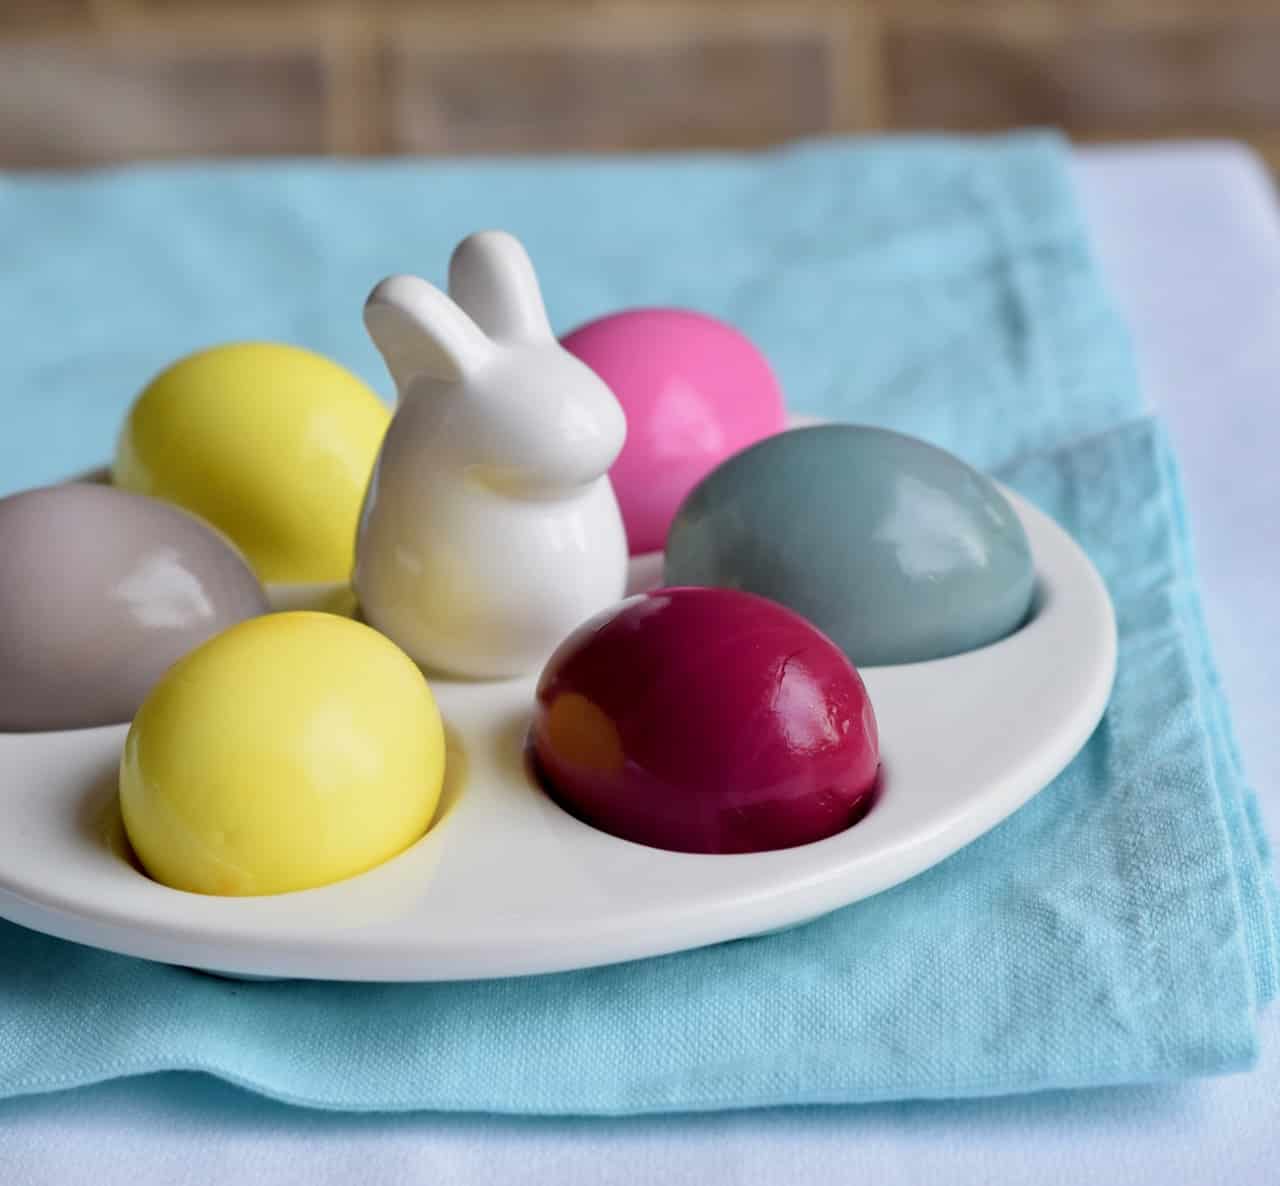 Naturally dyed hard cooked eggs in the Instant Pot. Use what you already have in your refrigerator like pickled beets and grape juice. These are on a cute rabbit plate.